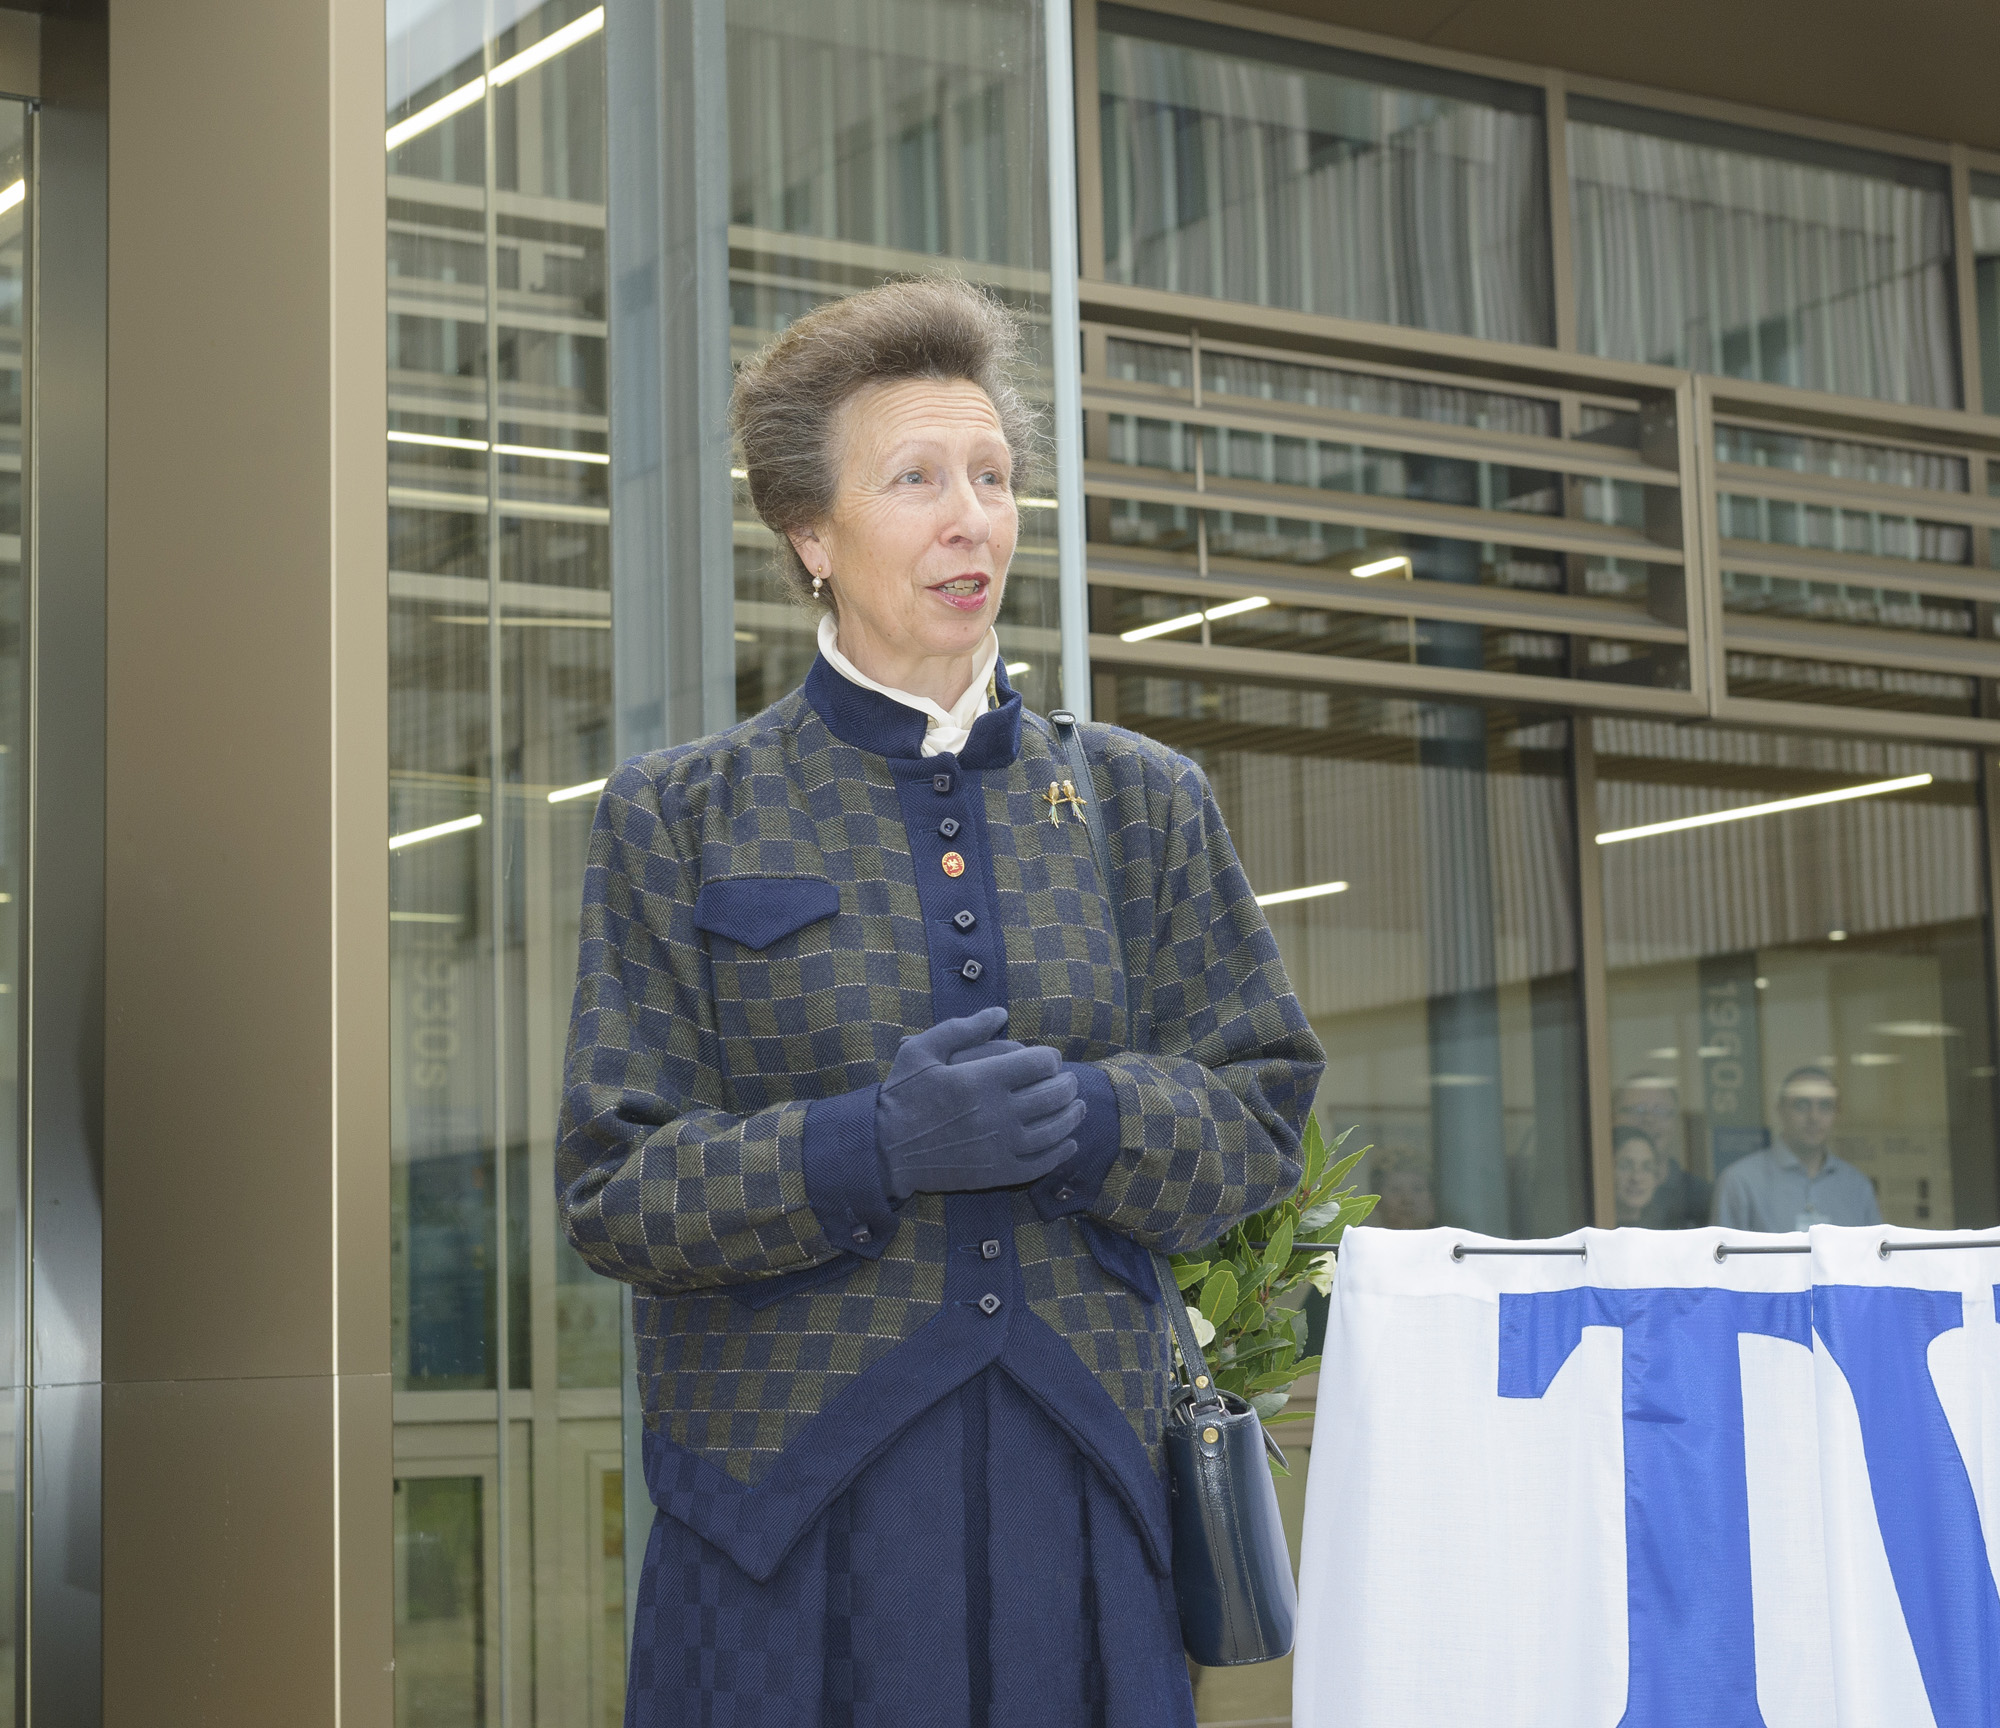 Her Royal Highness officially opens TWI's new facilities